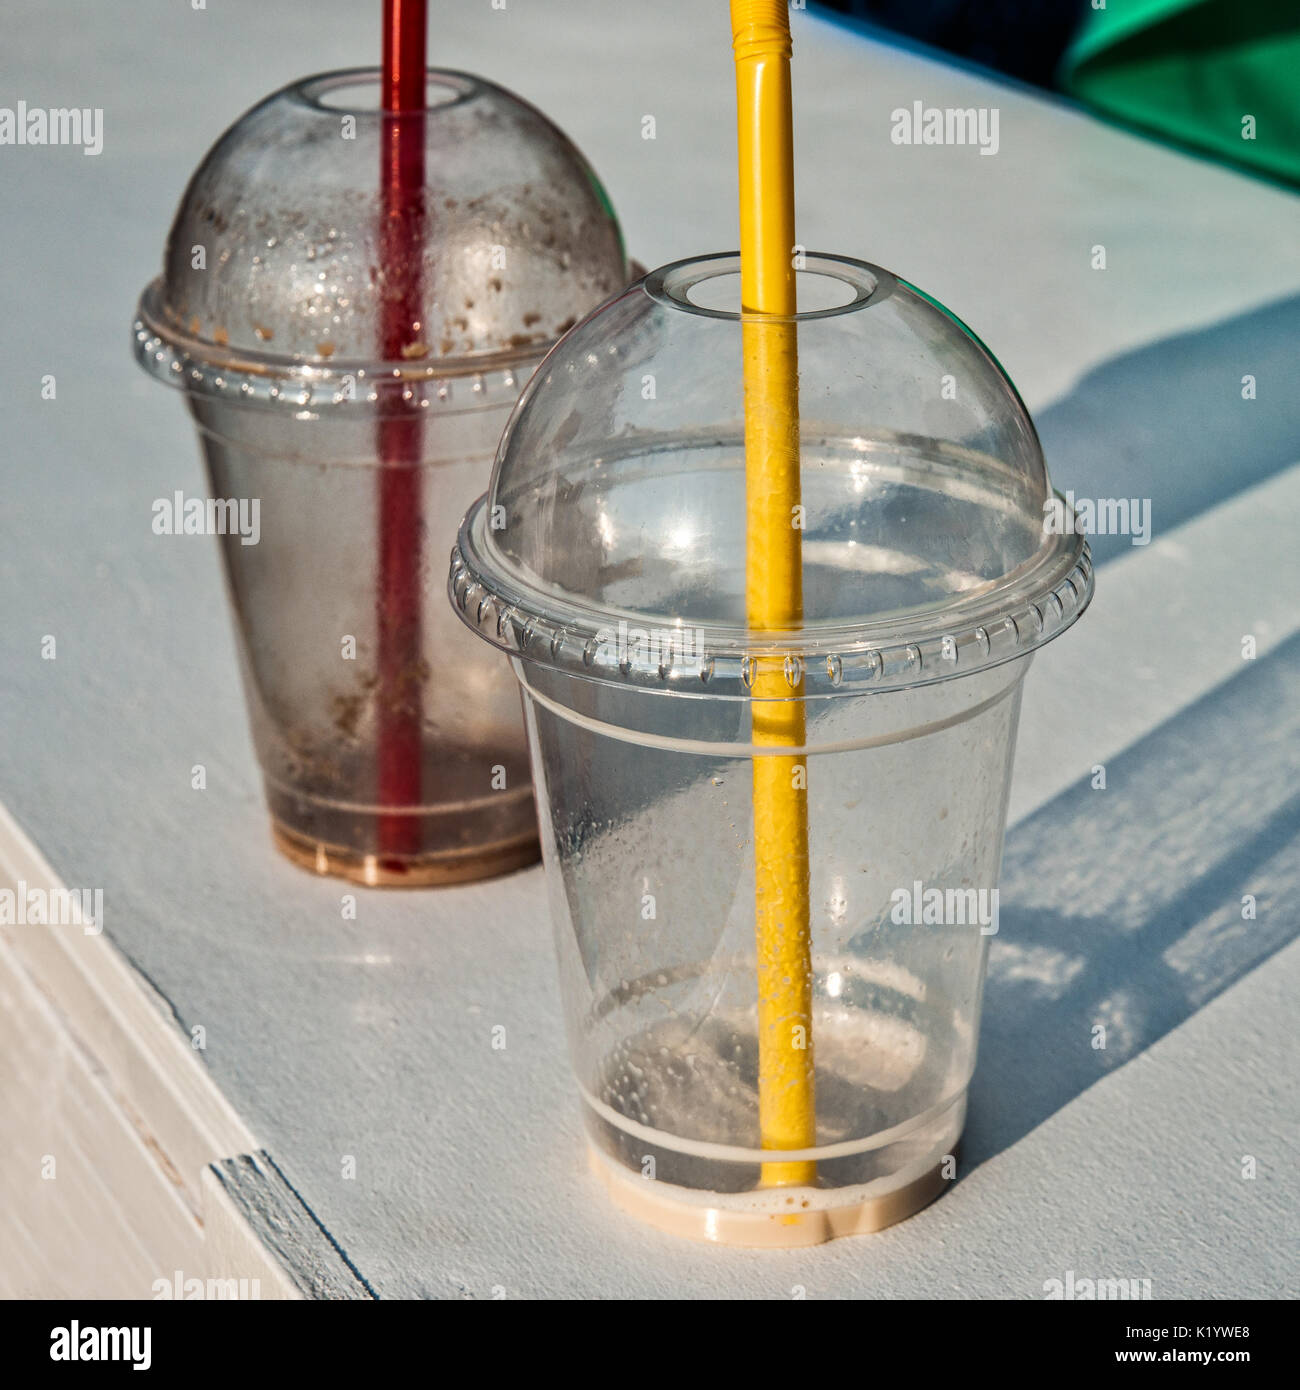 Empty plastic glasses with red and yellow straws stand on a white deck. Some green cloth and reflection of blue object in the background. Sunlit abstr Stock Photo